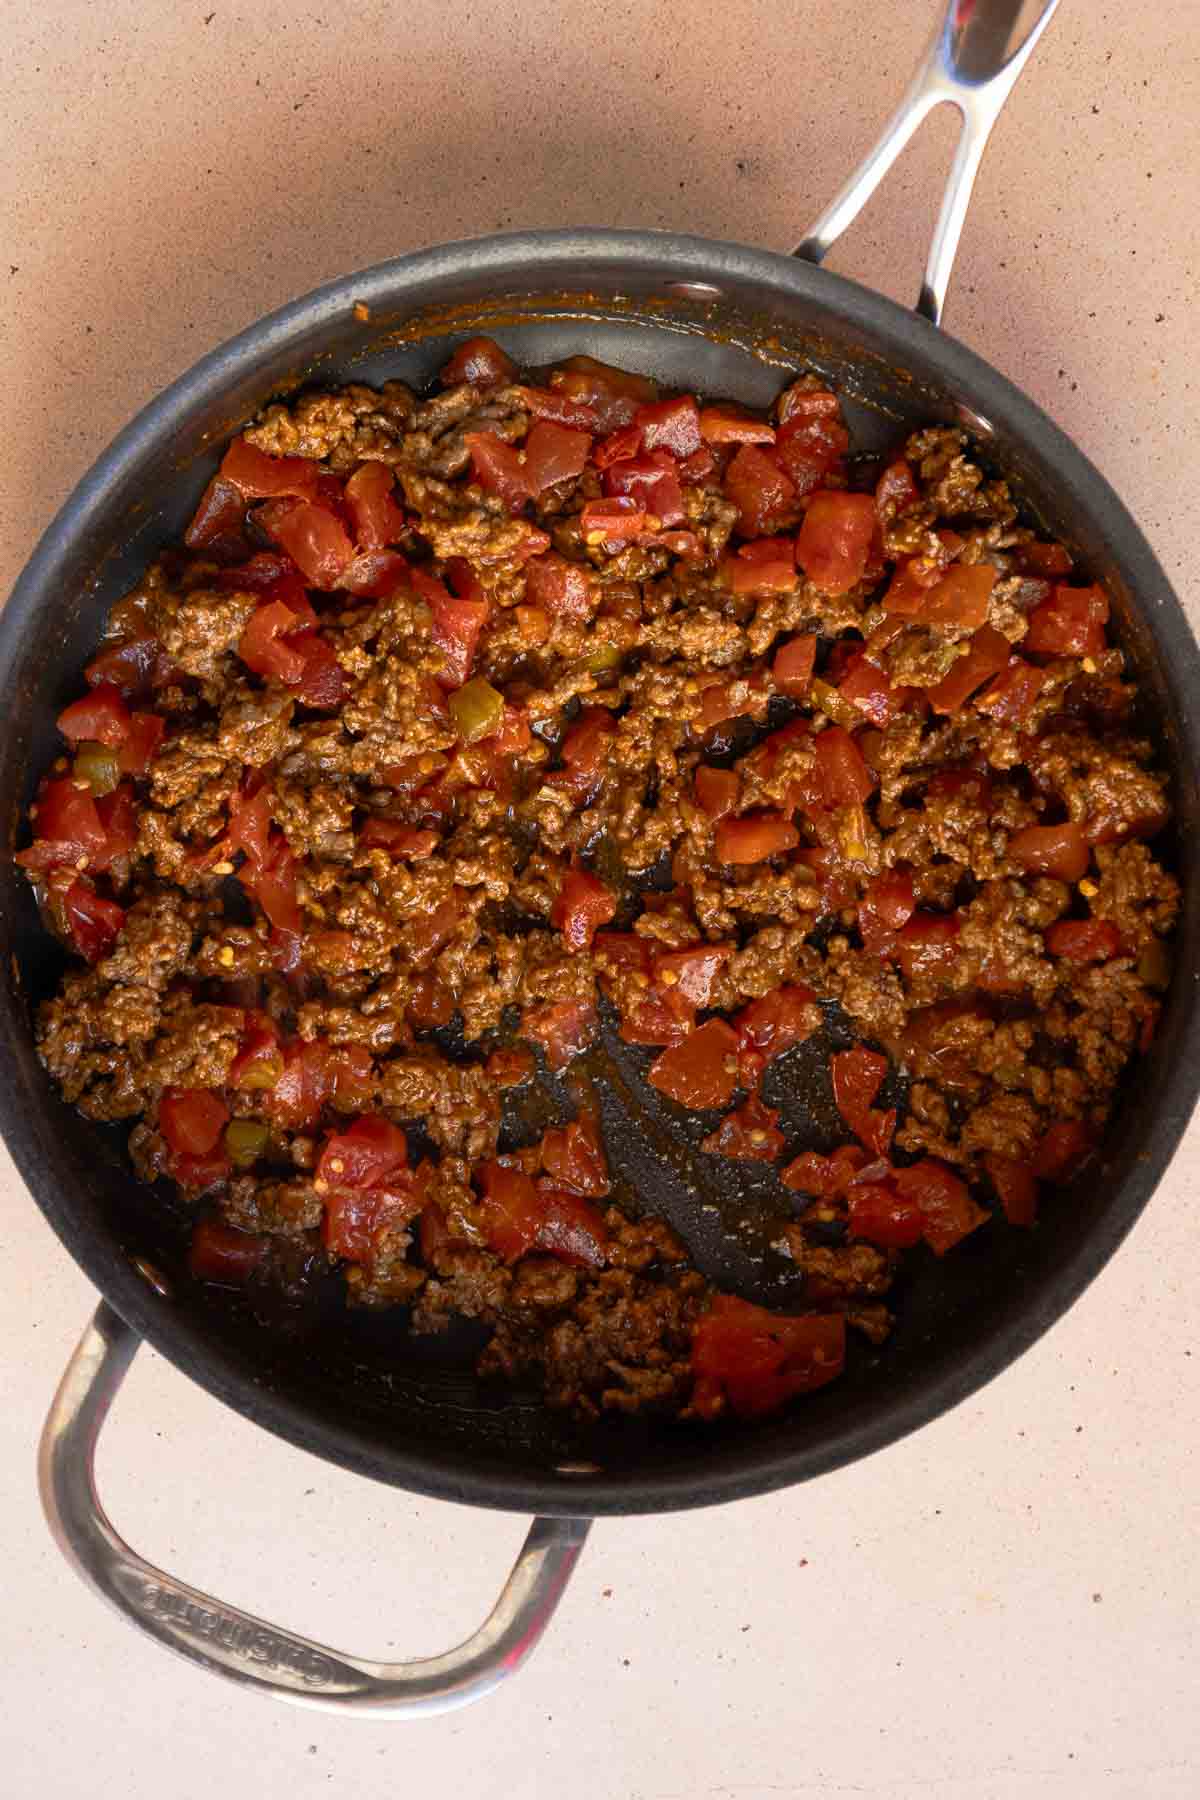 The ground beef and Rotel are mixed together in the large saucepan.